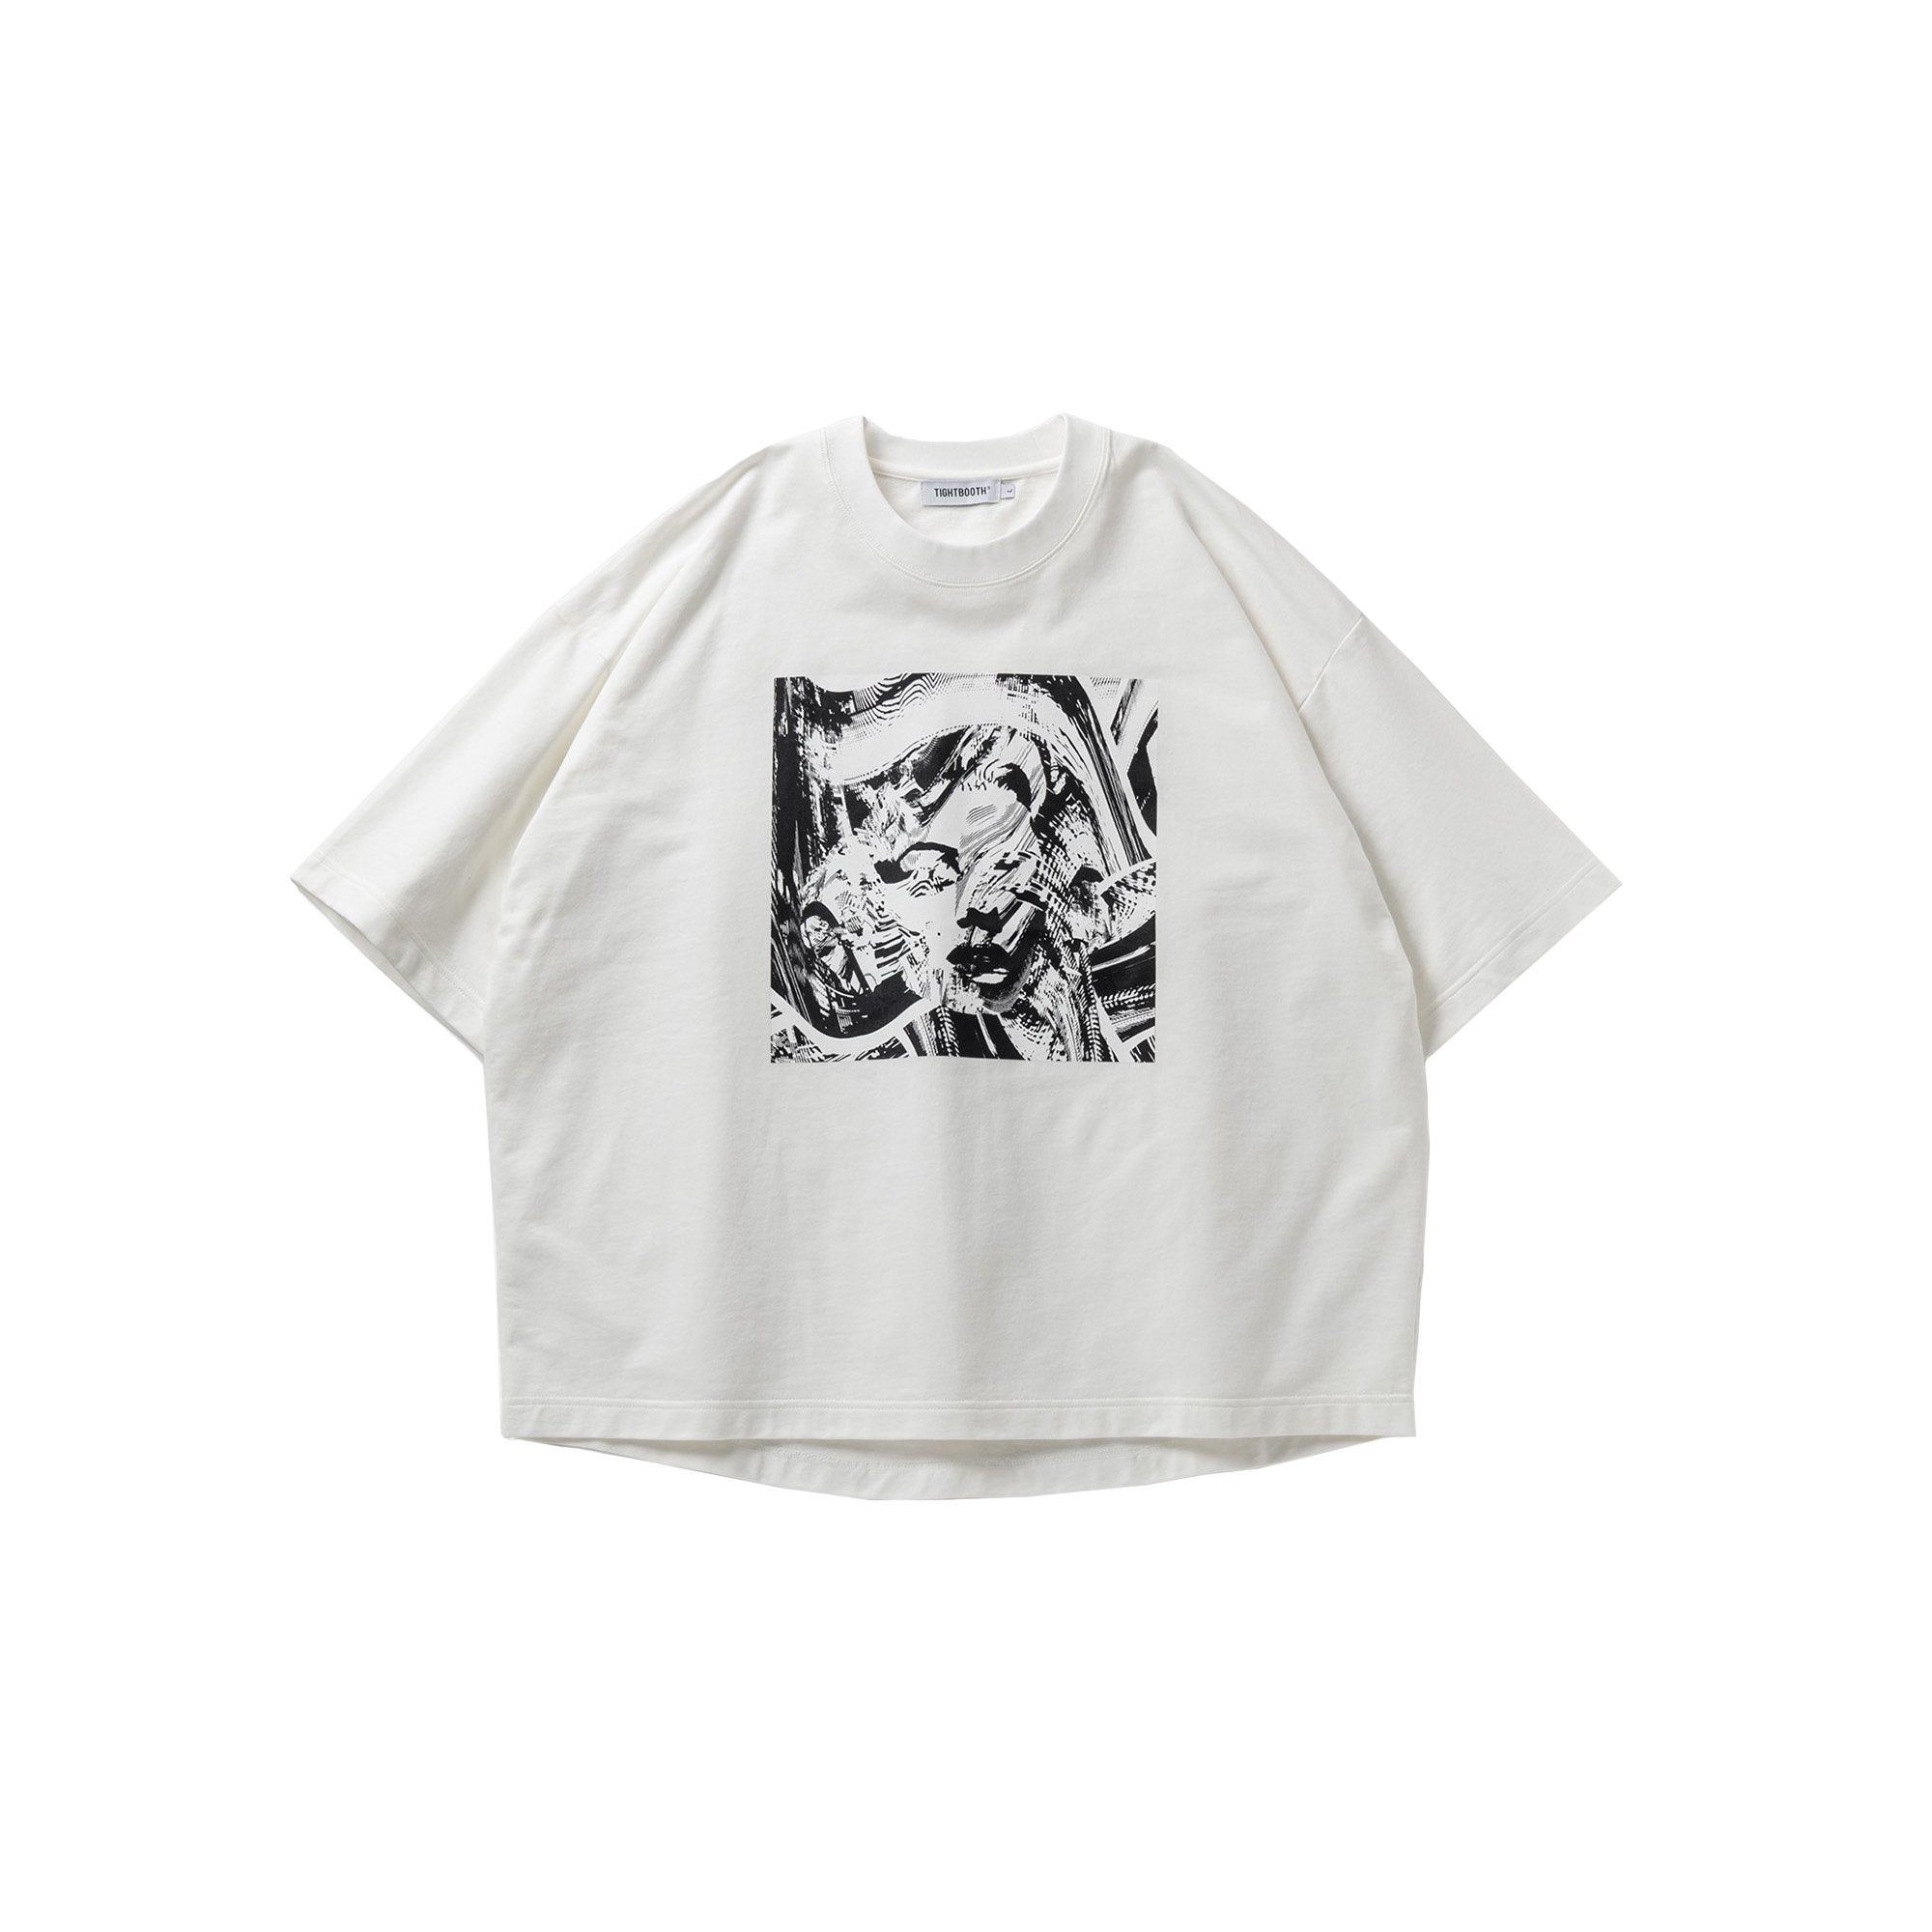 TIGHTBOOTH - Blond Tee - White